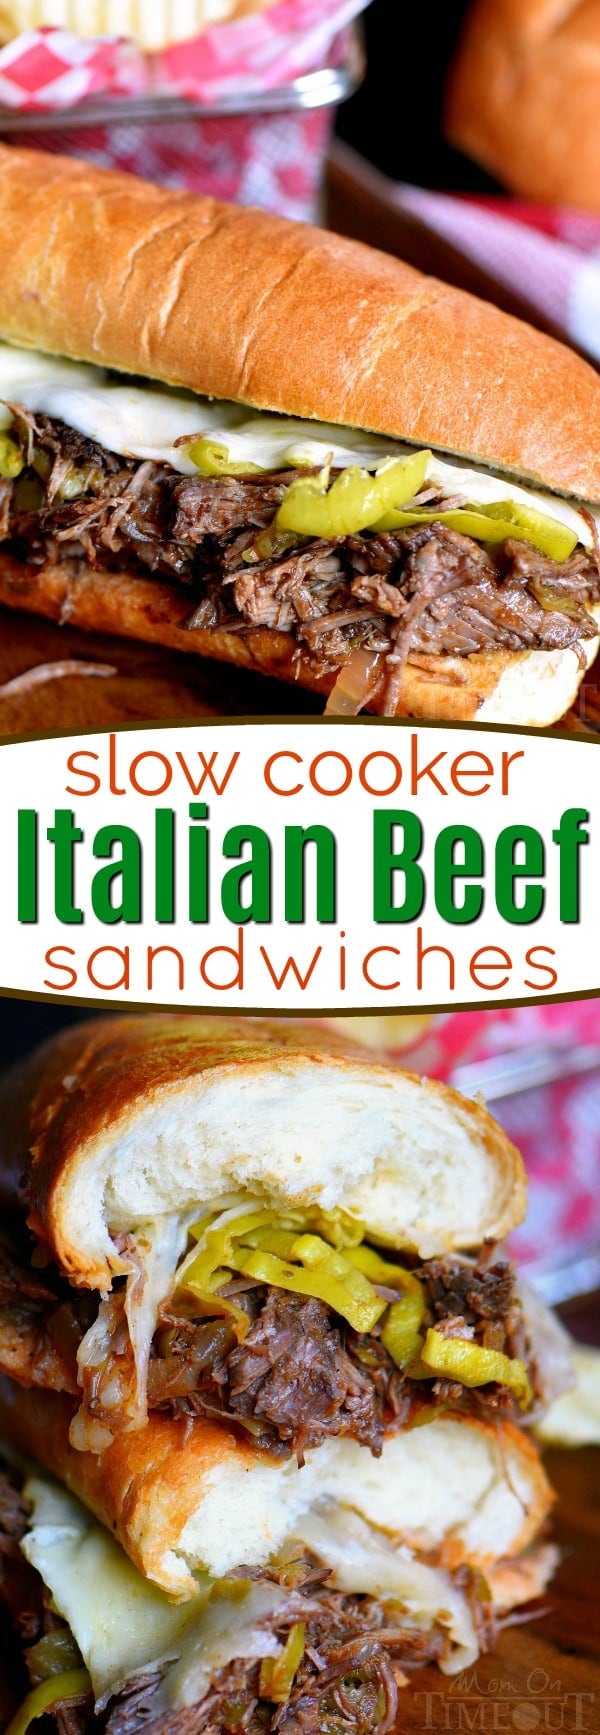 Load up on the delicious flavor of these Slow Cooker Italian Beef Sandwiches! A handful of ingredients are all you need to pull this amazing dinner off. Great for game day or an easy weeknight dinner! // Mom On Timeout